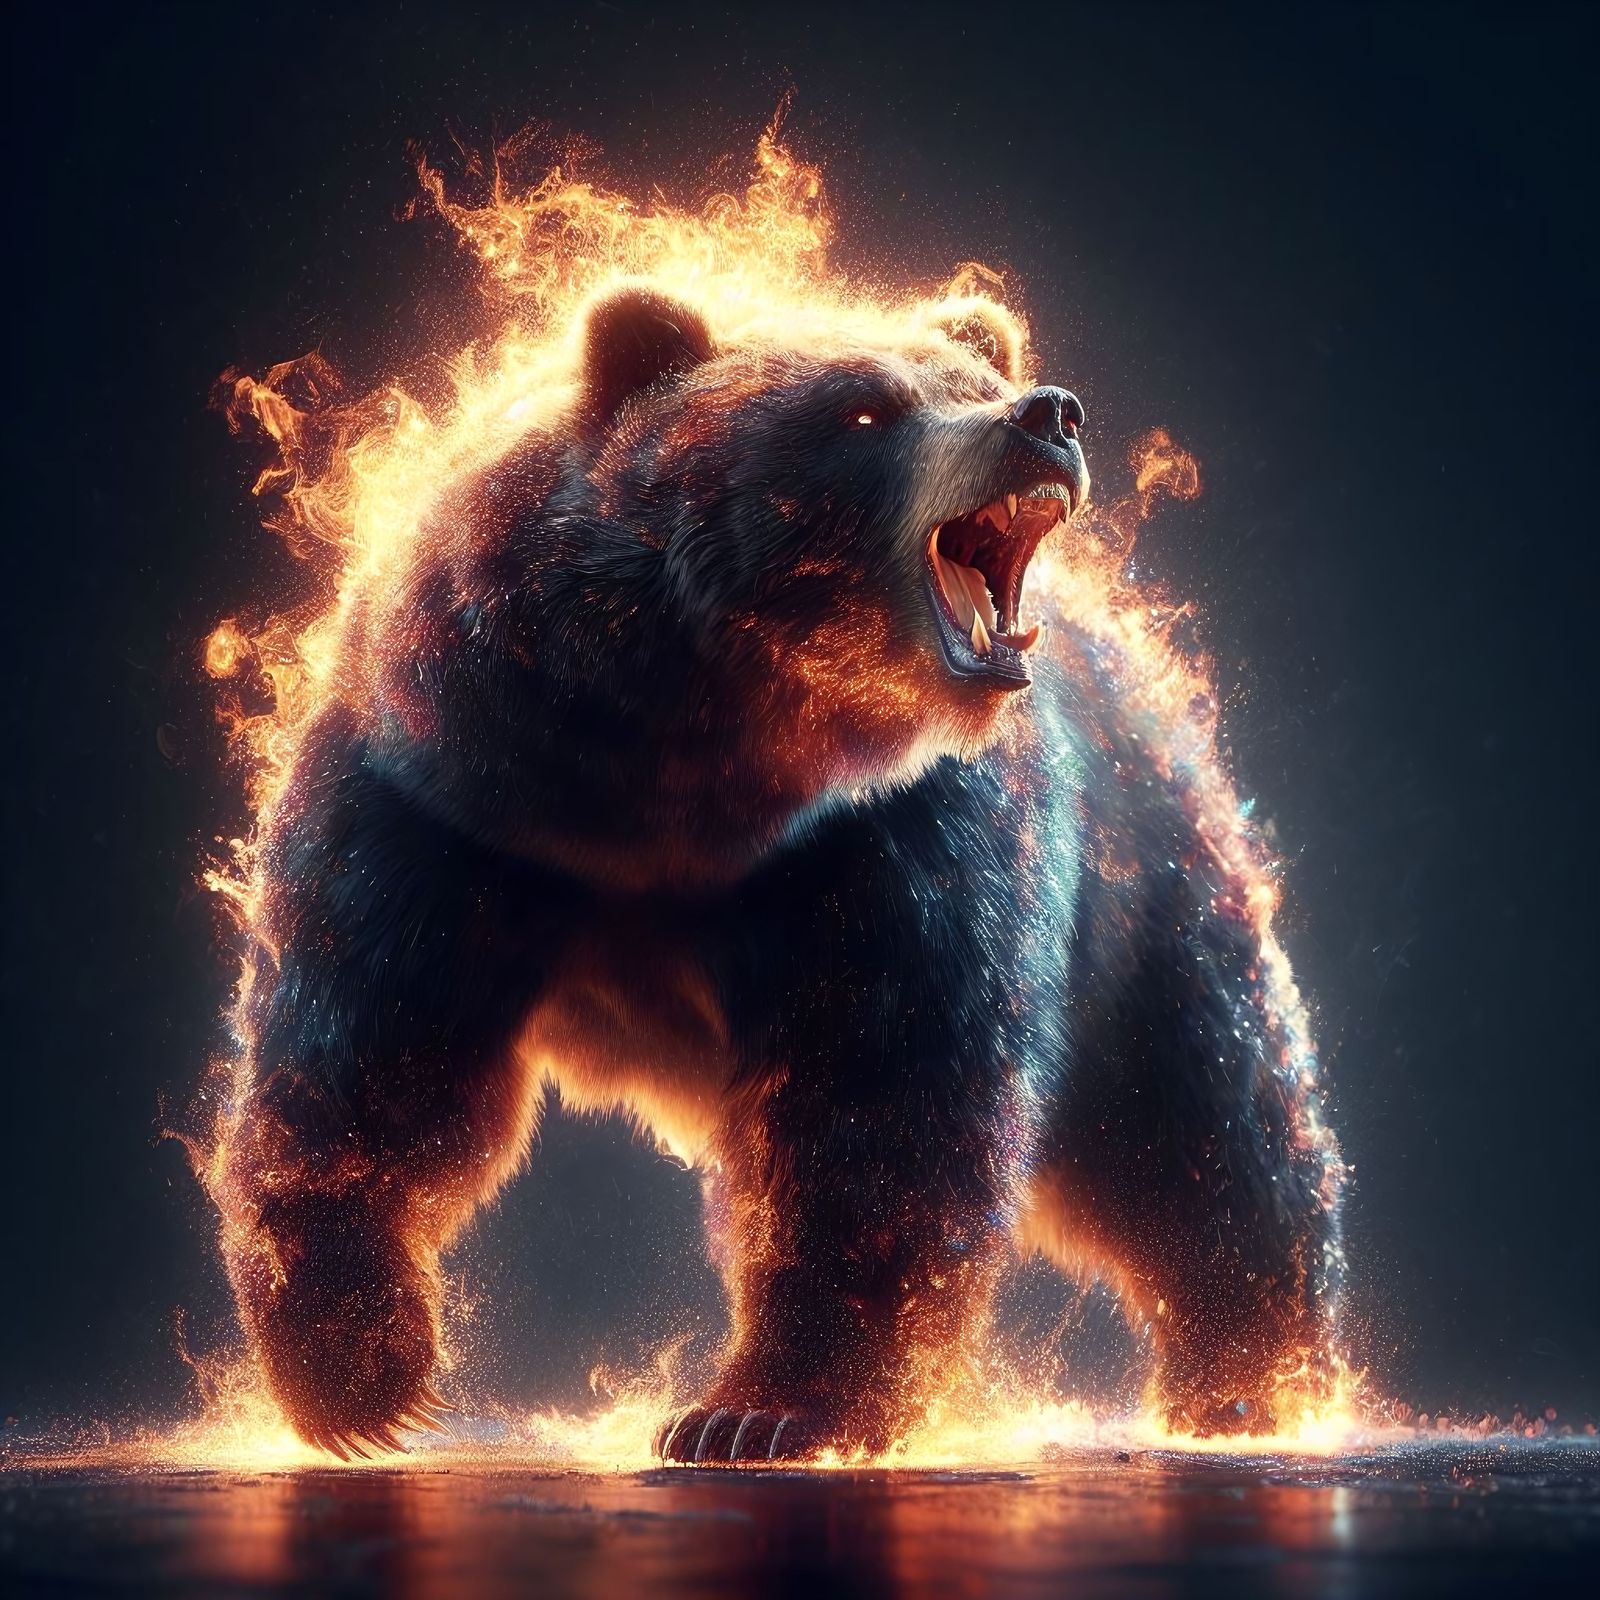 Burning Ghost Grizzly